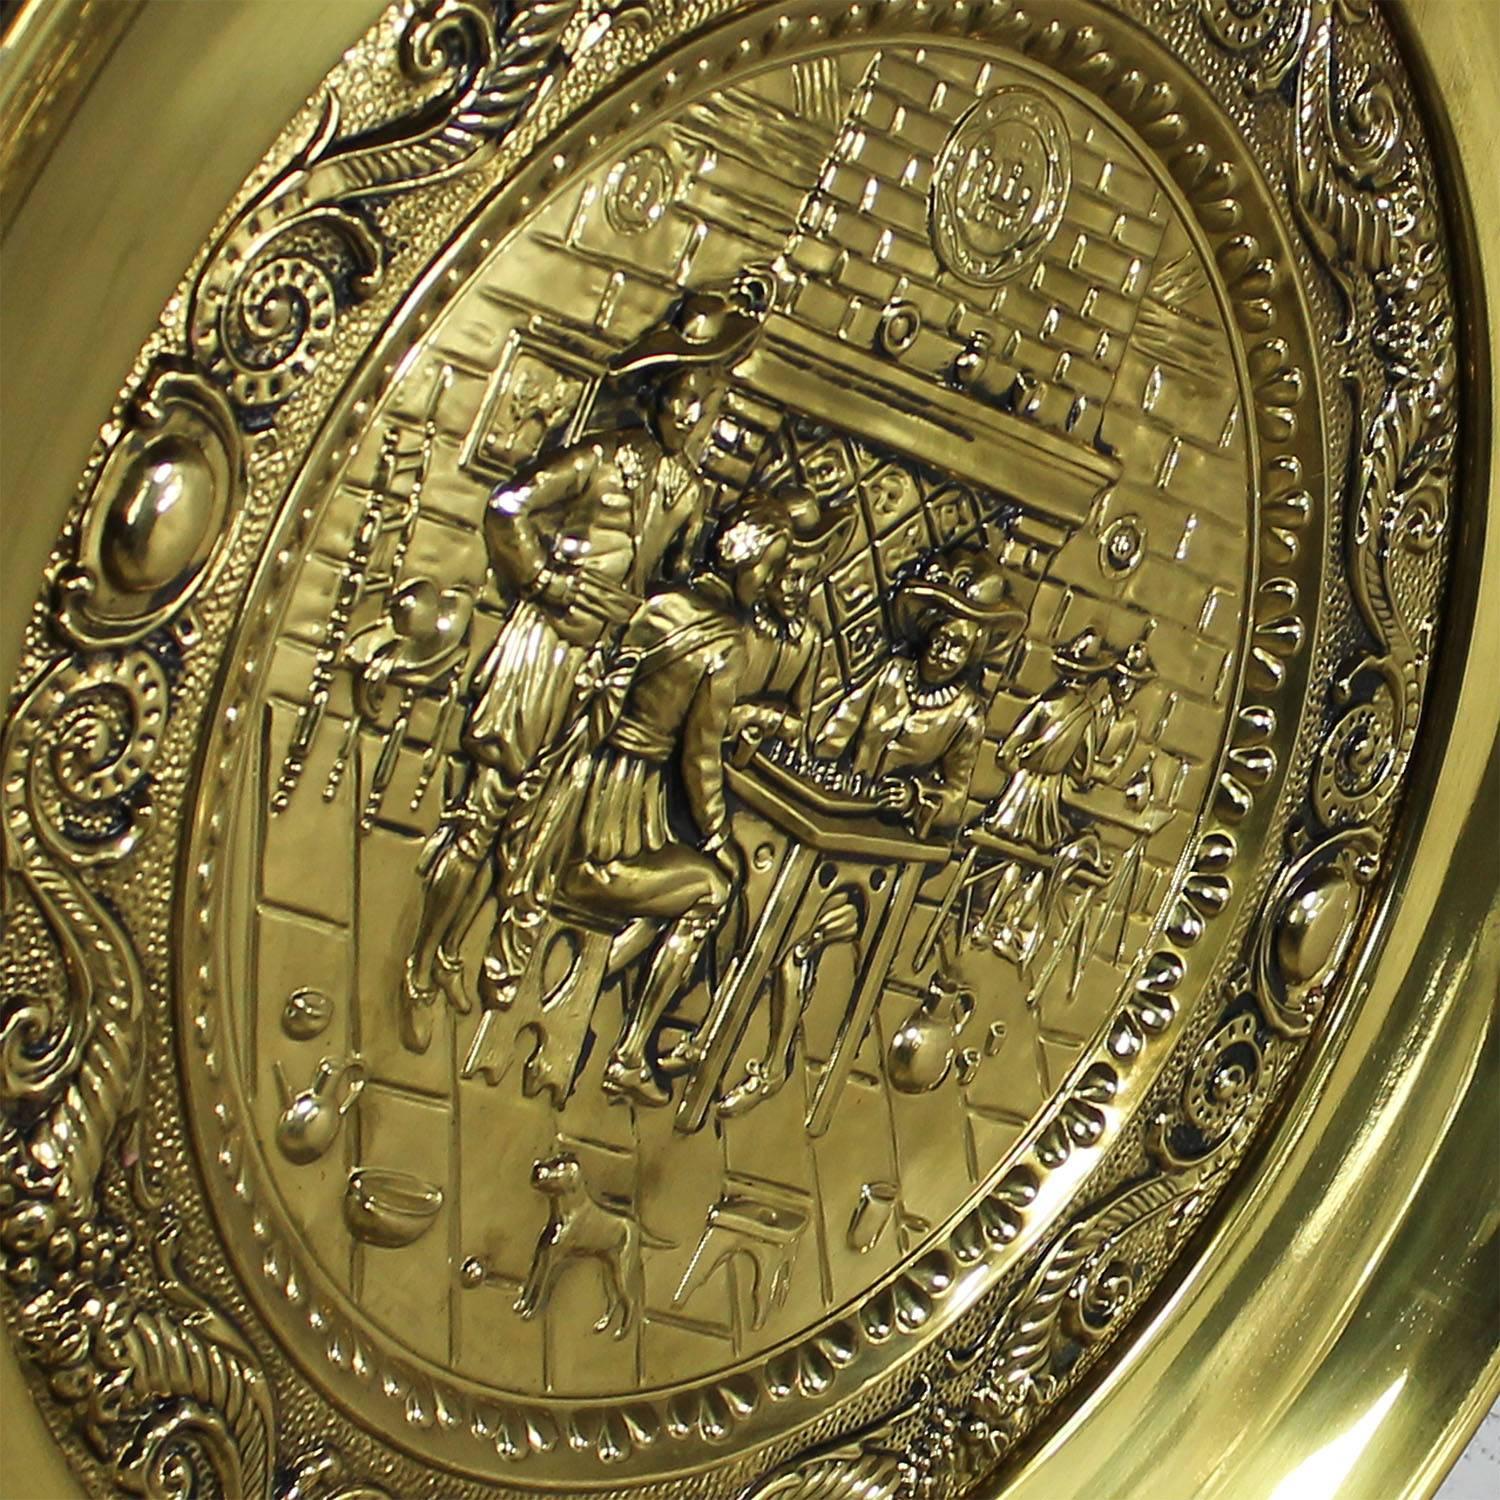 Incredible monumental, 34.5 inches in diameter, decorative brassware hanging wall plates with embossed English pub scene design. Made by Peerage Brass circa 1950s and in wonderful vintage condition.

If you are looking for large three-dimensional